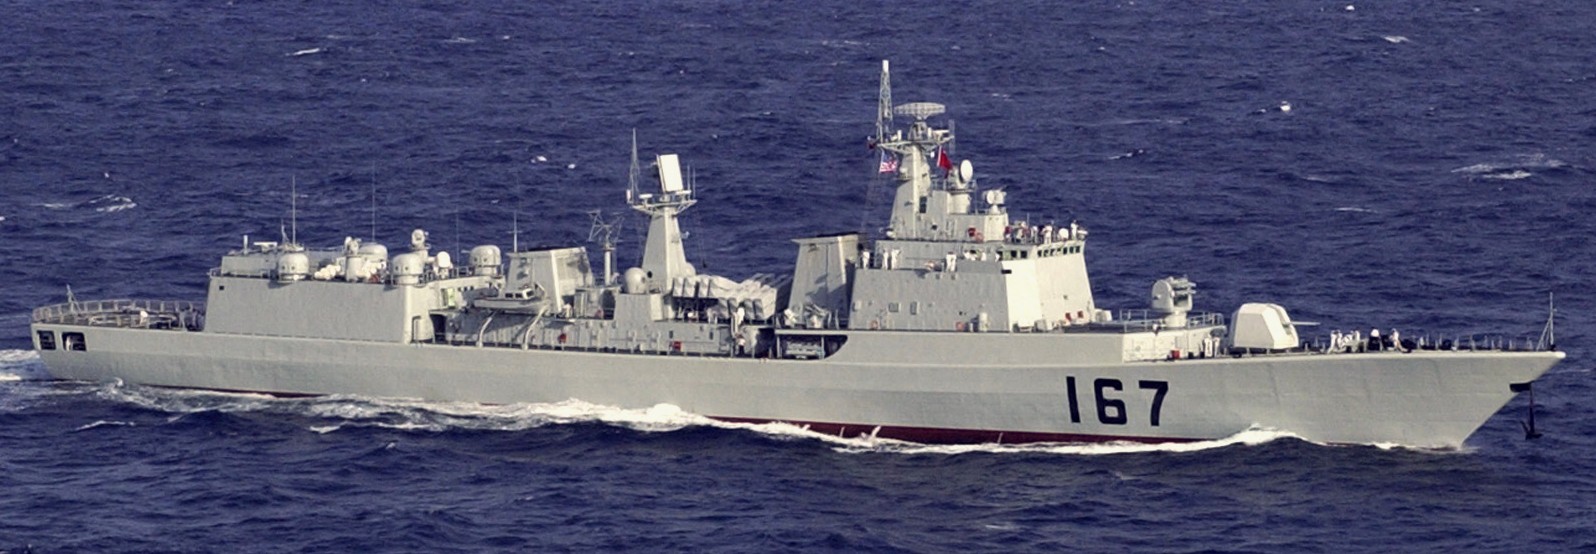 ddg-167 plans shenzen type 051b luhai class guided missile destroyer china people's liberation army navy 05